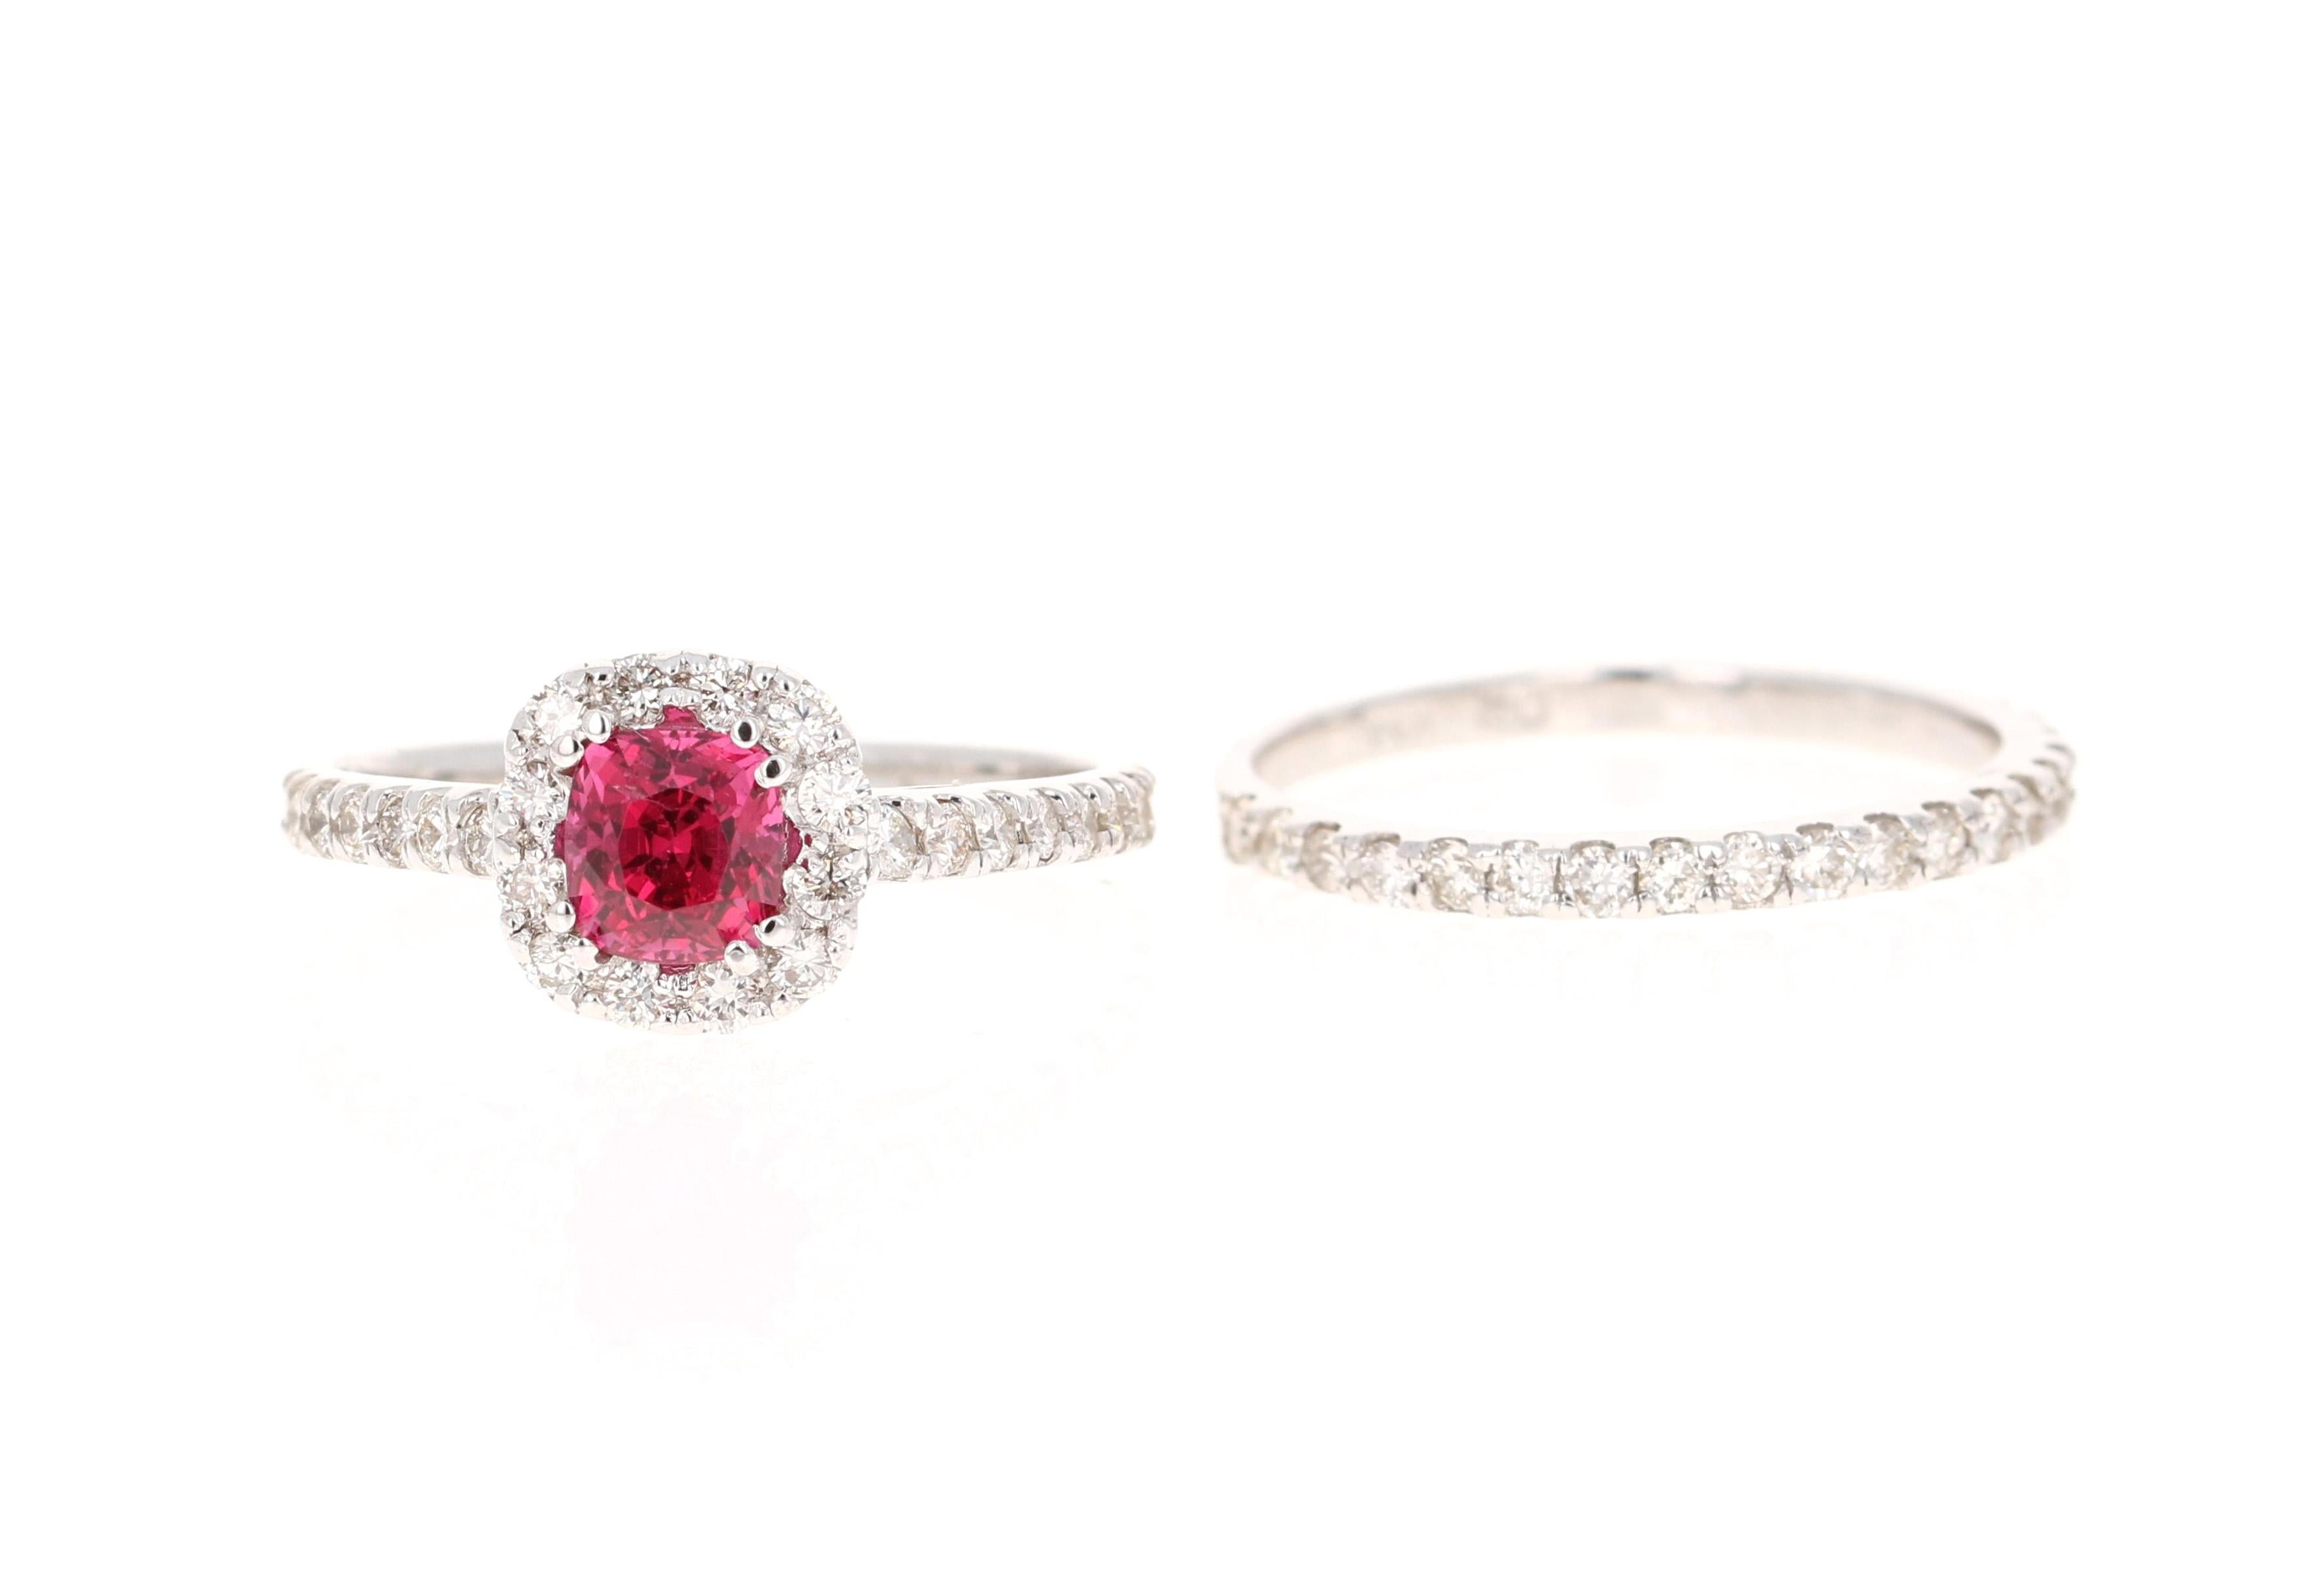 This ring has a gorgeous natural Cushion Cut Red Spinel that weighs 0.90 carats and is surrounded by 60 Round Cut Diamonds that weigh 1.05 carats.  The Clarity and Color of the diamonds is VS2-H.  The total carat weight of the ring is 1.95